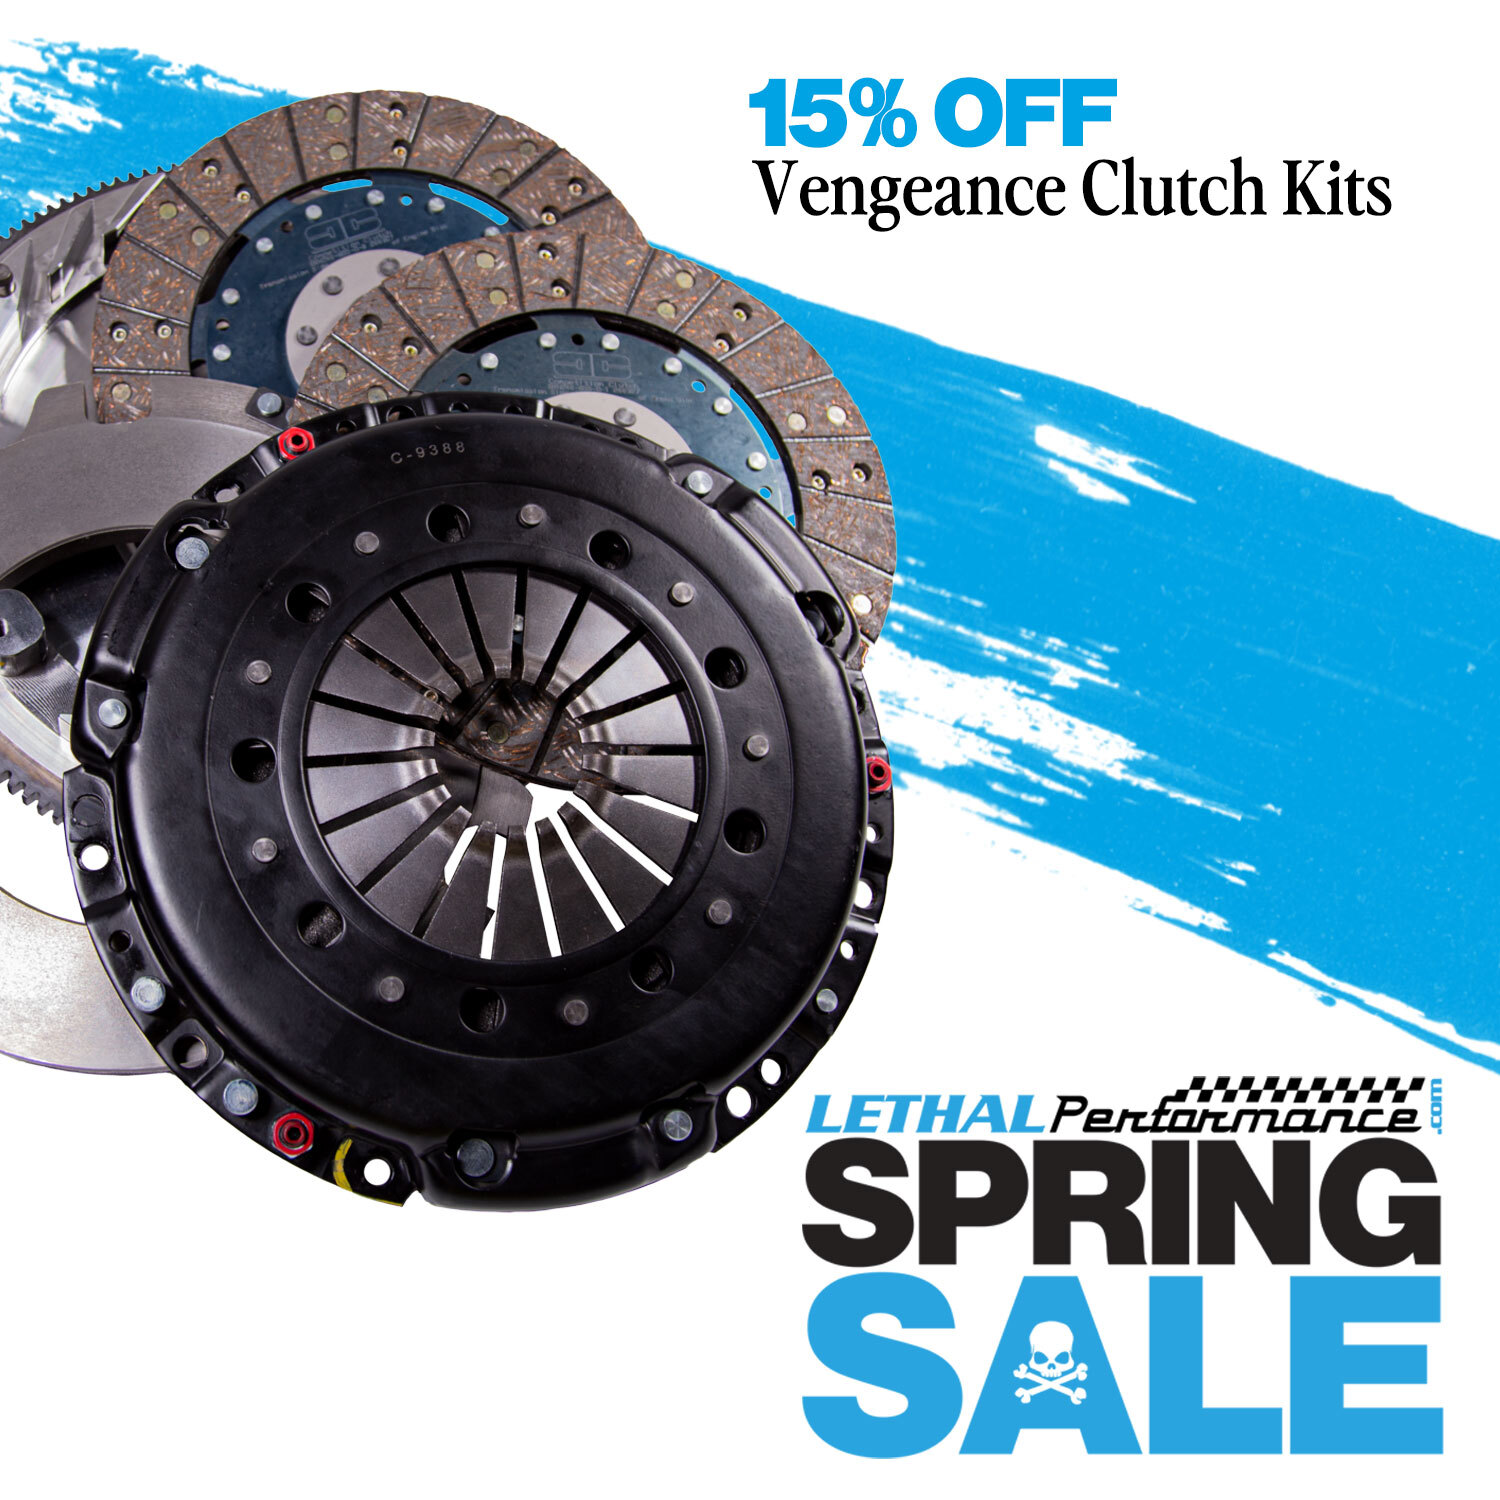 S650 Mustang Spring SALE has SPRUNG here at Lethal Performance!! SpringSale_Vengeanc